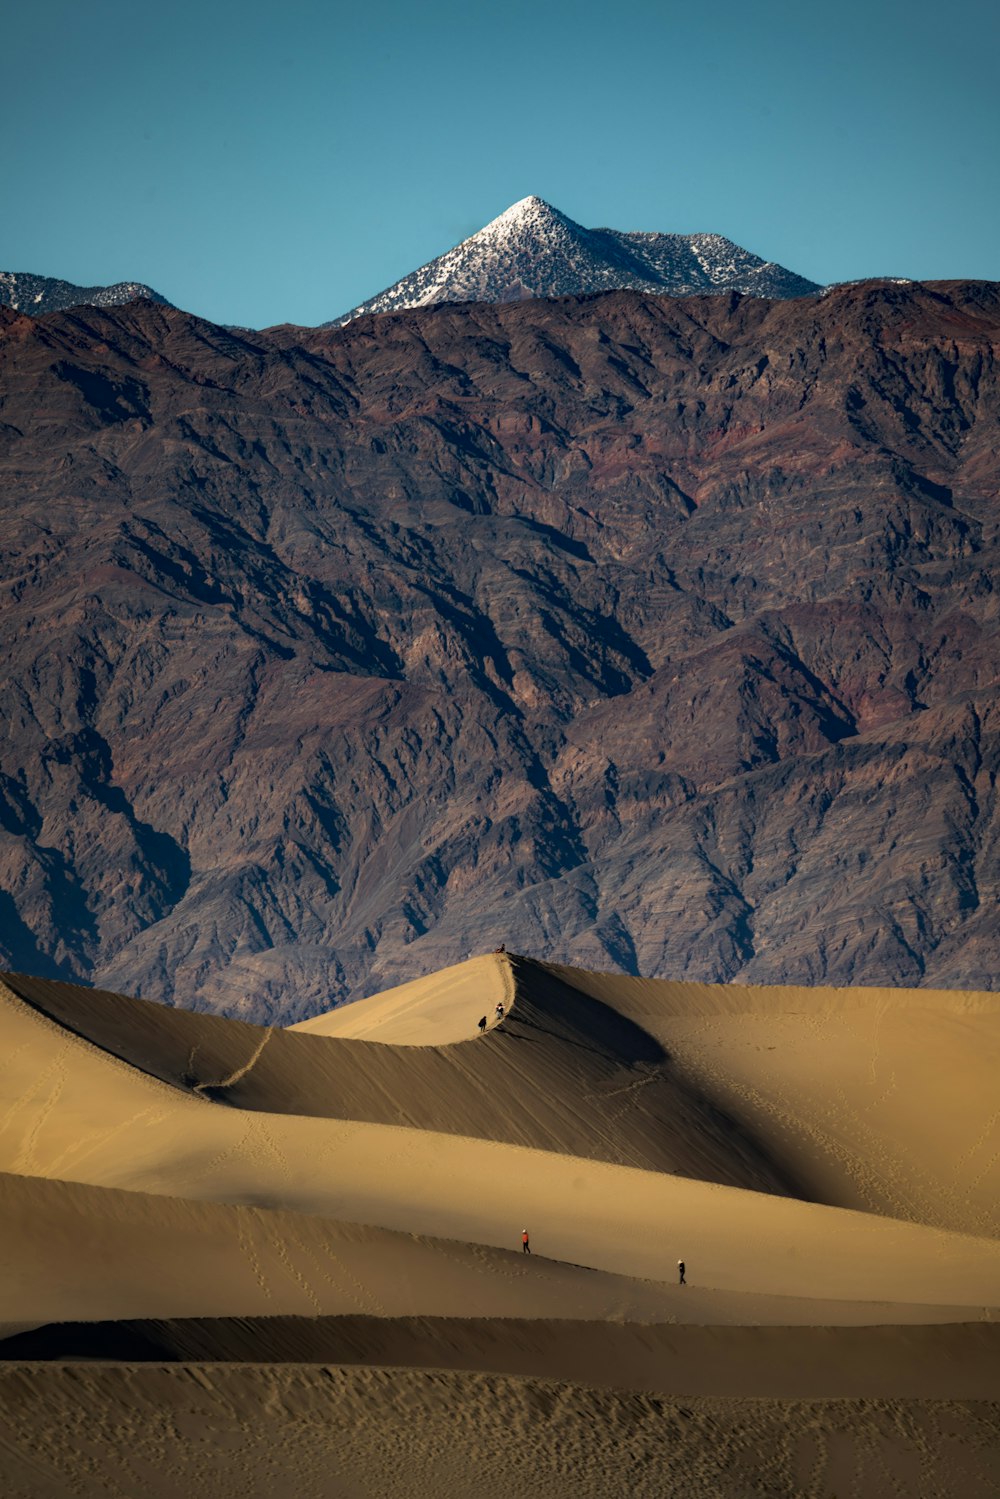 a mountain range in the distance with sand dunes in the foreground